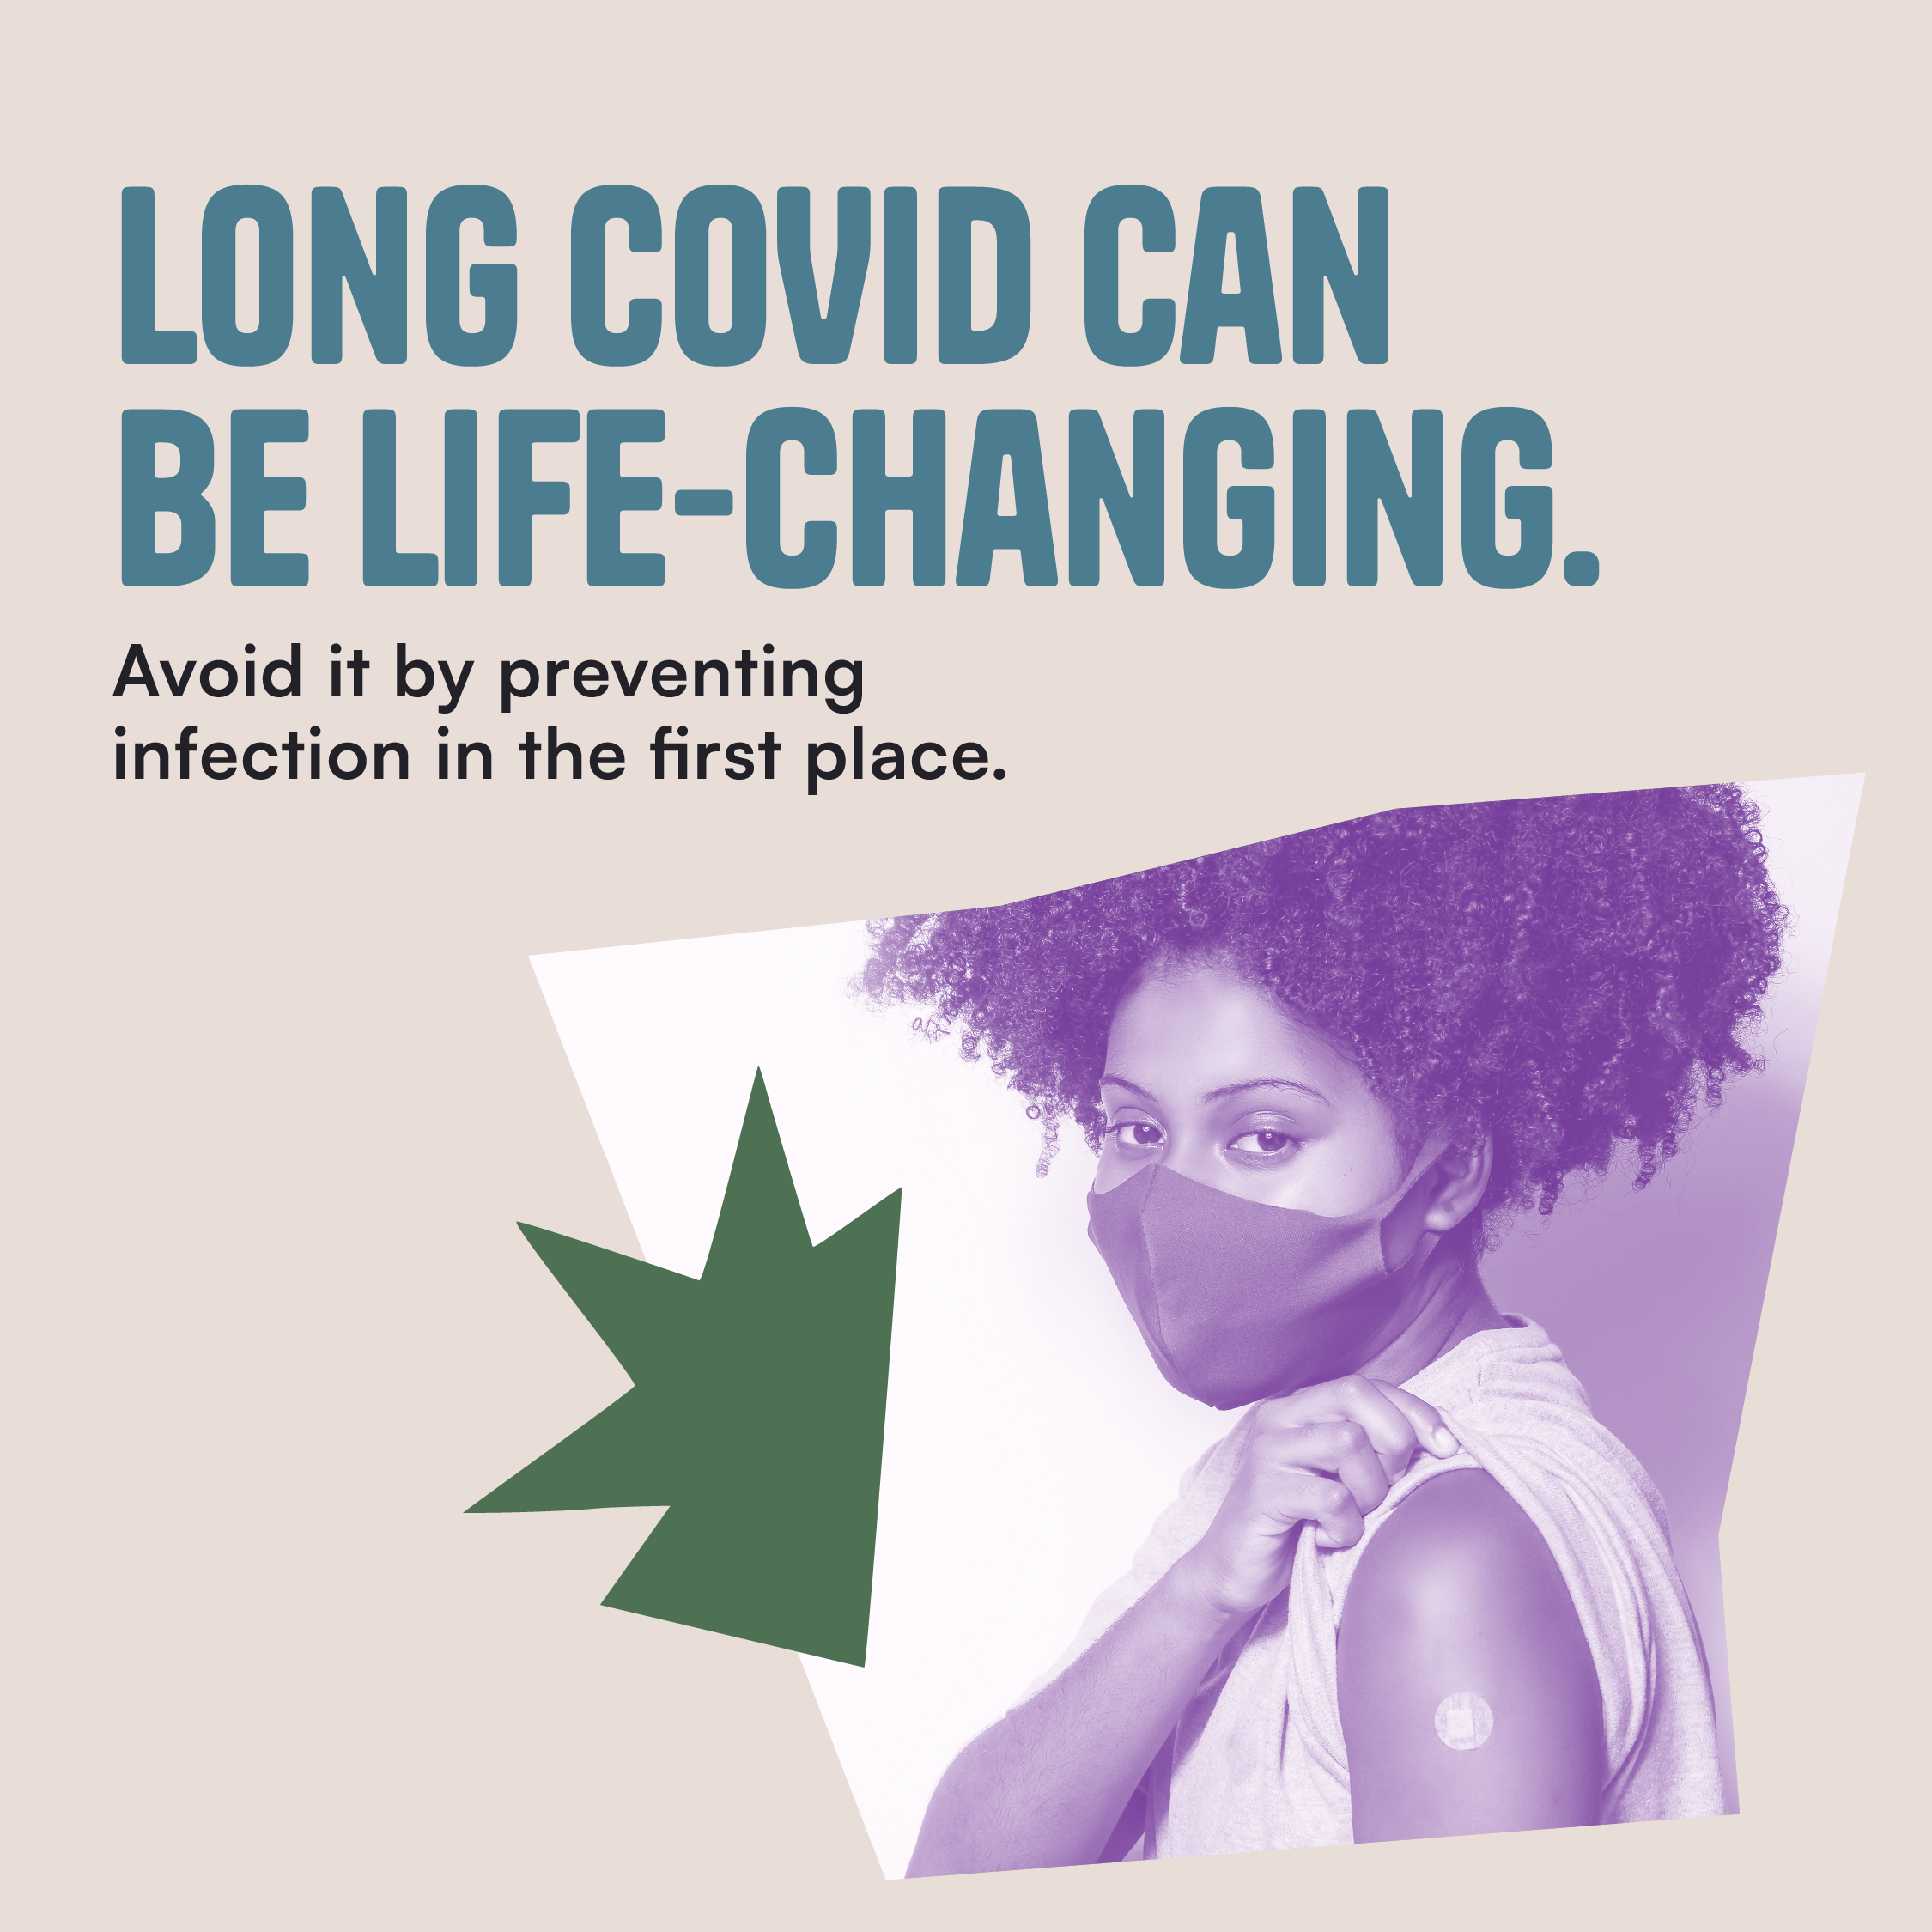 Thumbnail image of a Black woman wearing a mask holding up her sleeve revealing an adhesive bandage implying she has been vaccinated against COVID-19. The text reads "Long COVID can be life-changing. Avoid it by preventing infection in the first place."